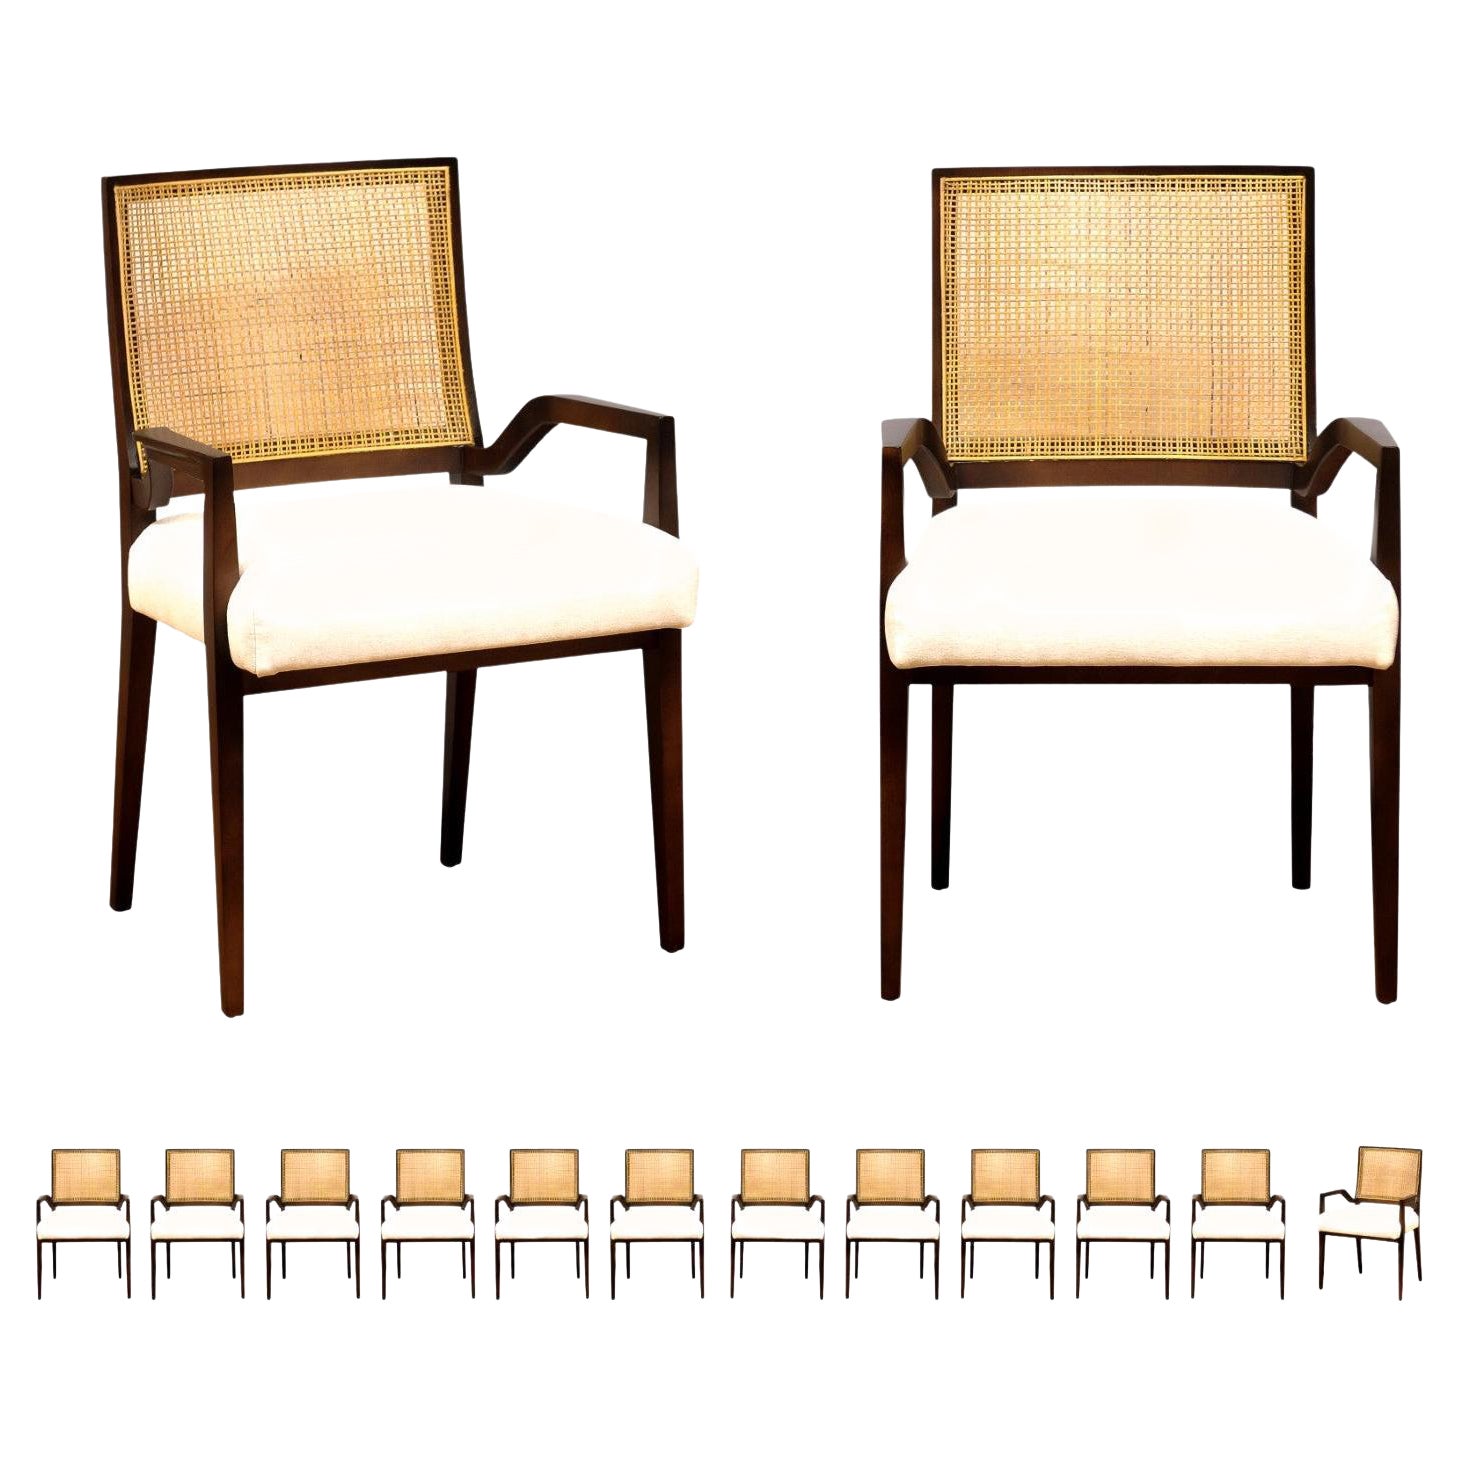 All Arms, Unrivaled Set of 12 Cane Dining Chairs by Michael Taylor, circa 1960 For Sale